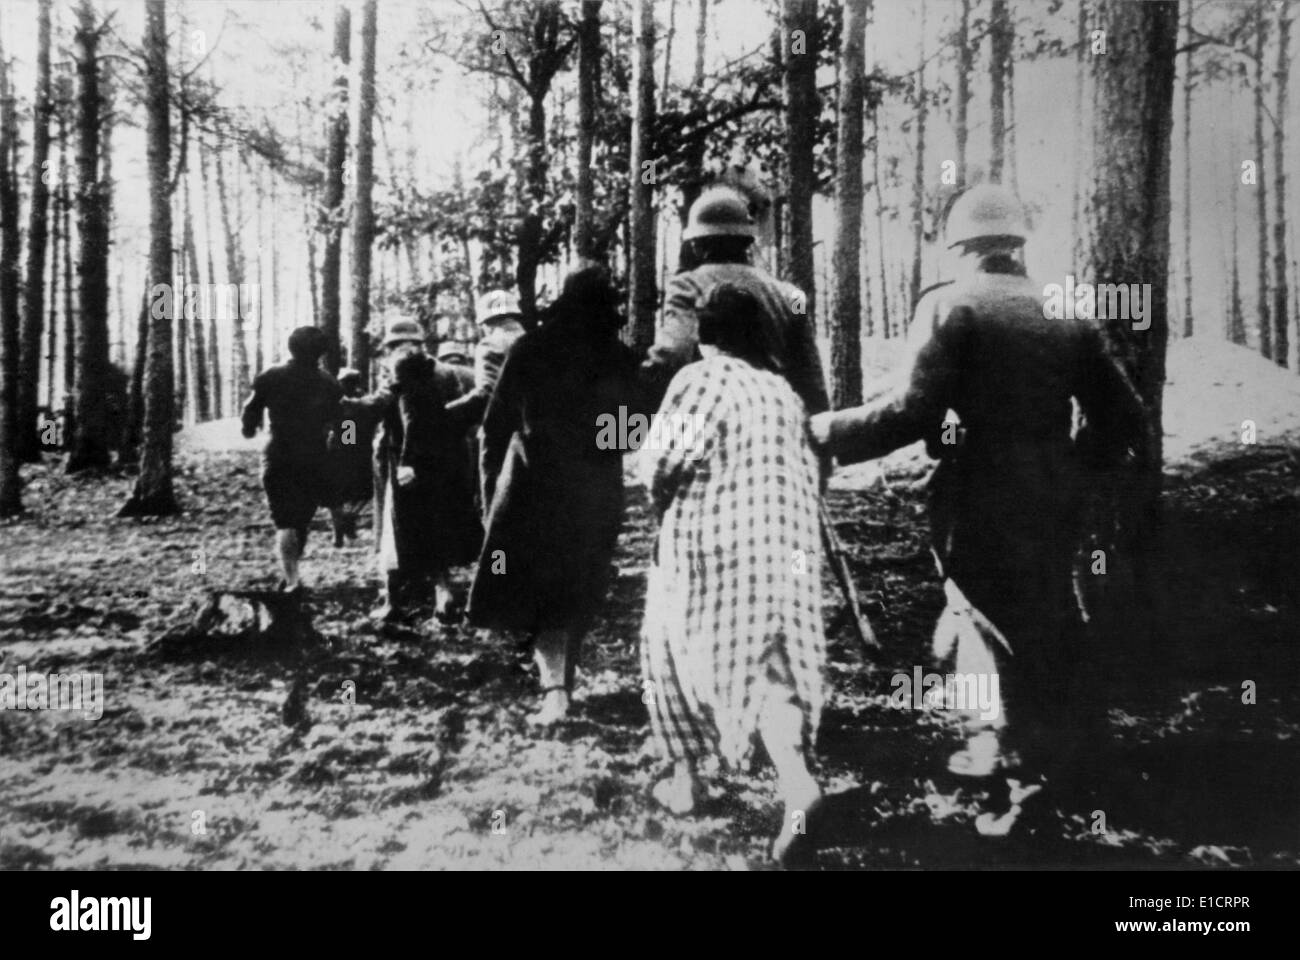 German atrocities in Poland ca. 1941. Polish women led by soldiers through woods to their execution during World War 2. Stock Photo